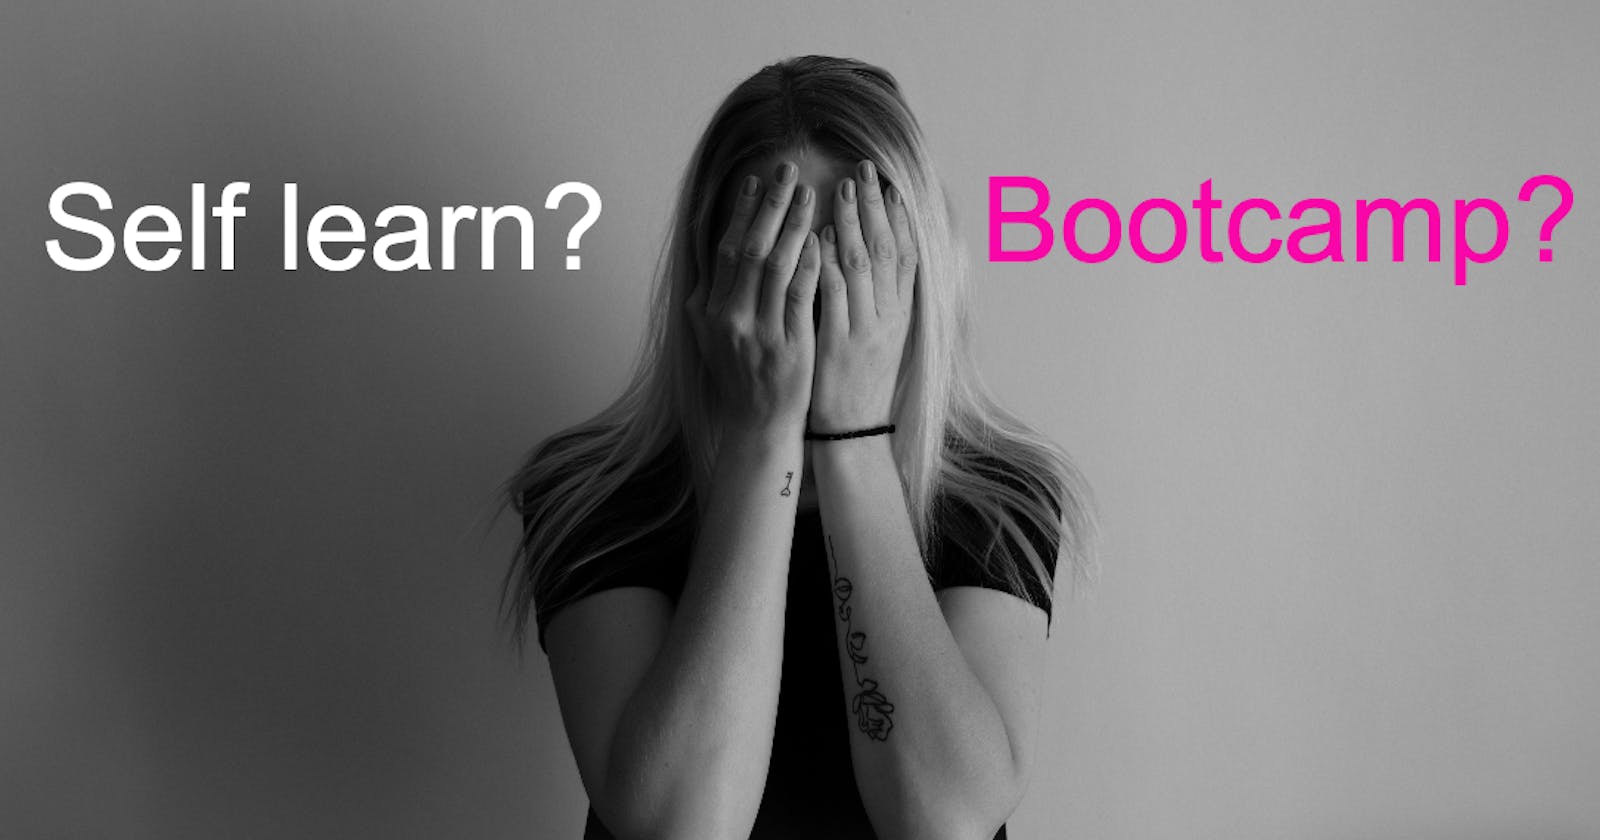 Coding Bootcamps vs Self Learning